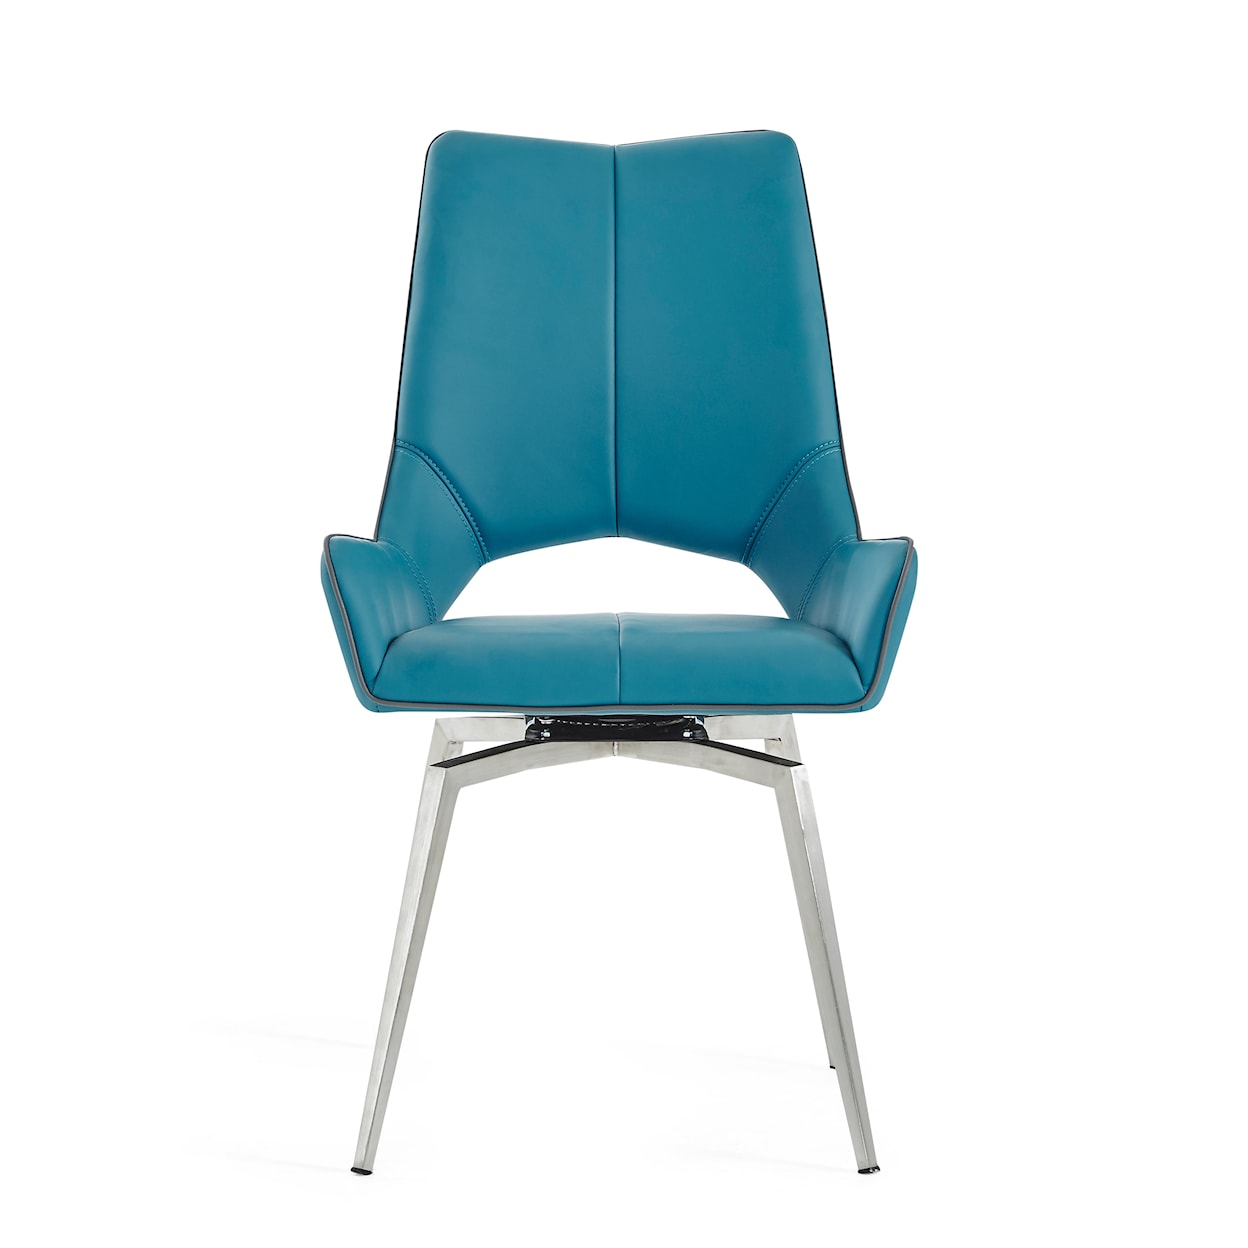 Global Furniture 4878 Swivel Turquoise Dining Chair Set of 2